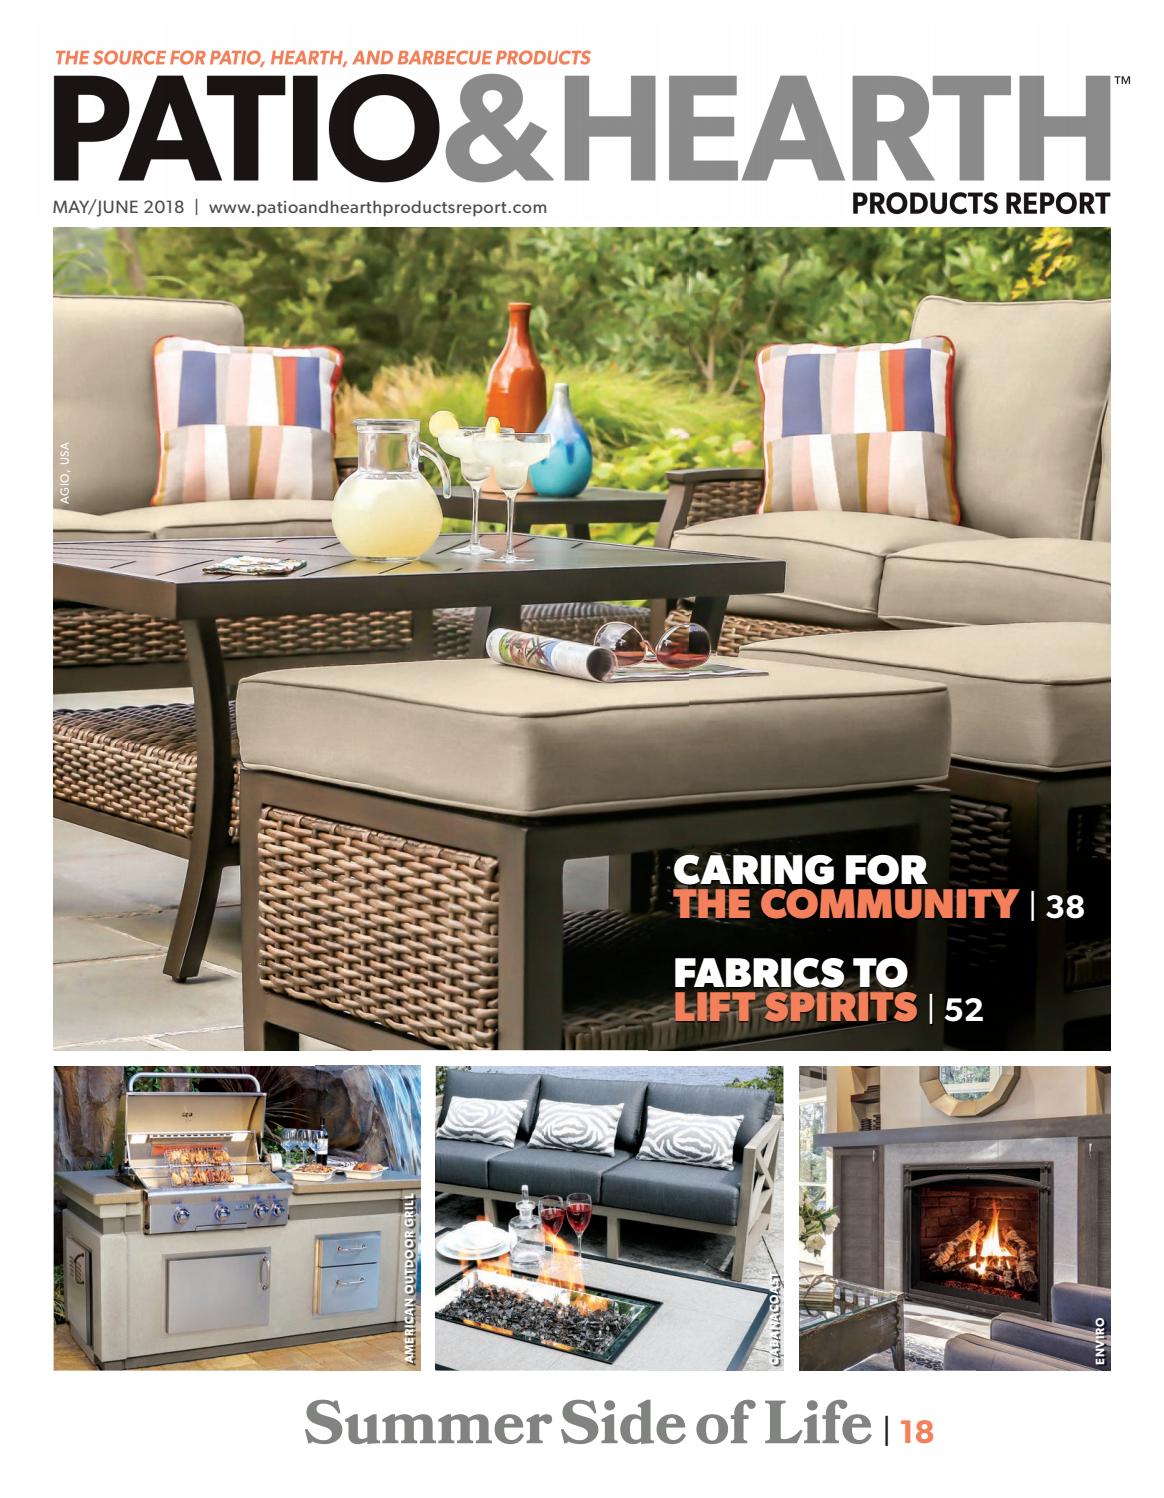 Georgetown Fireplace and Patios Fresh Patio & Hearth Products Report May June 2018 by Peninsula